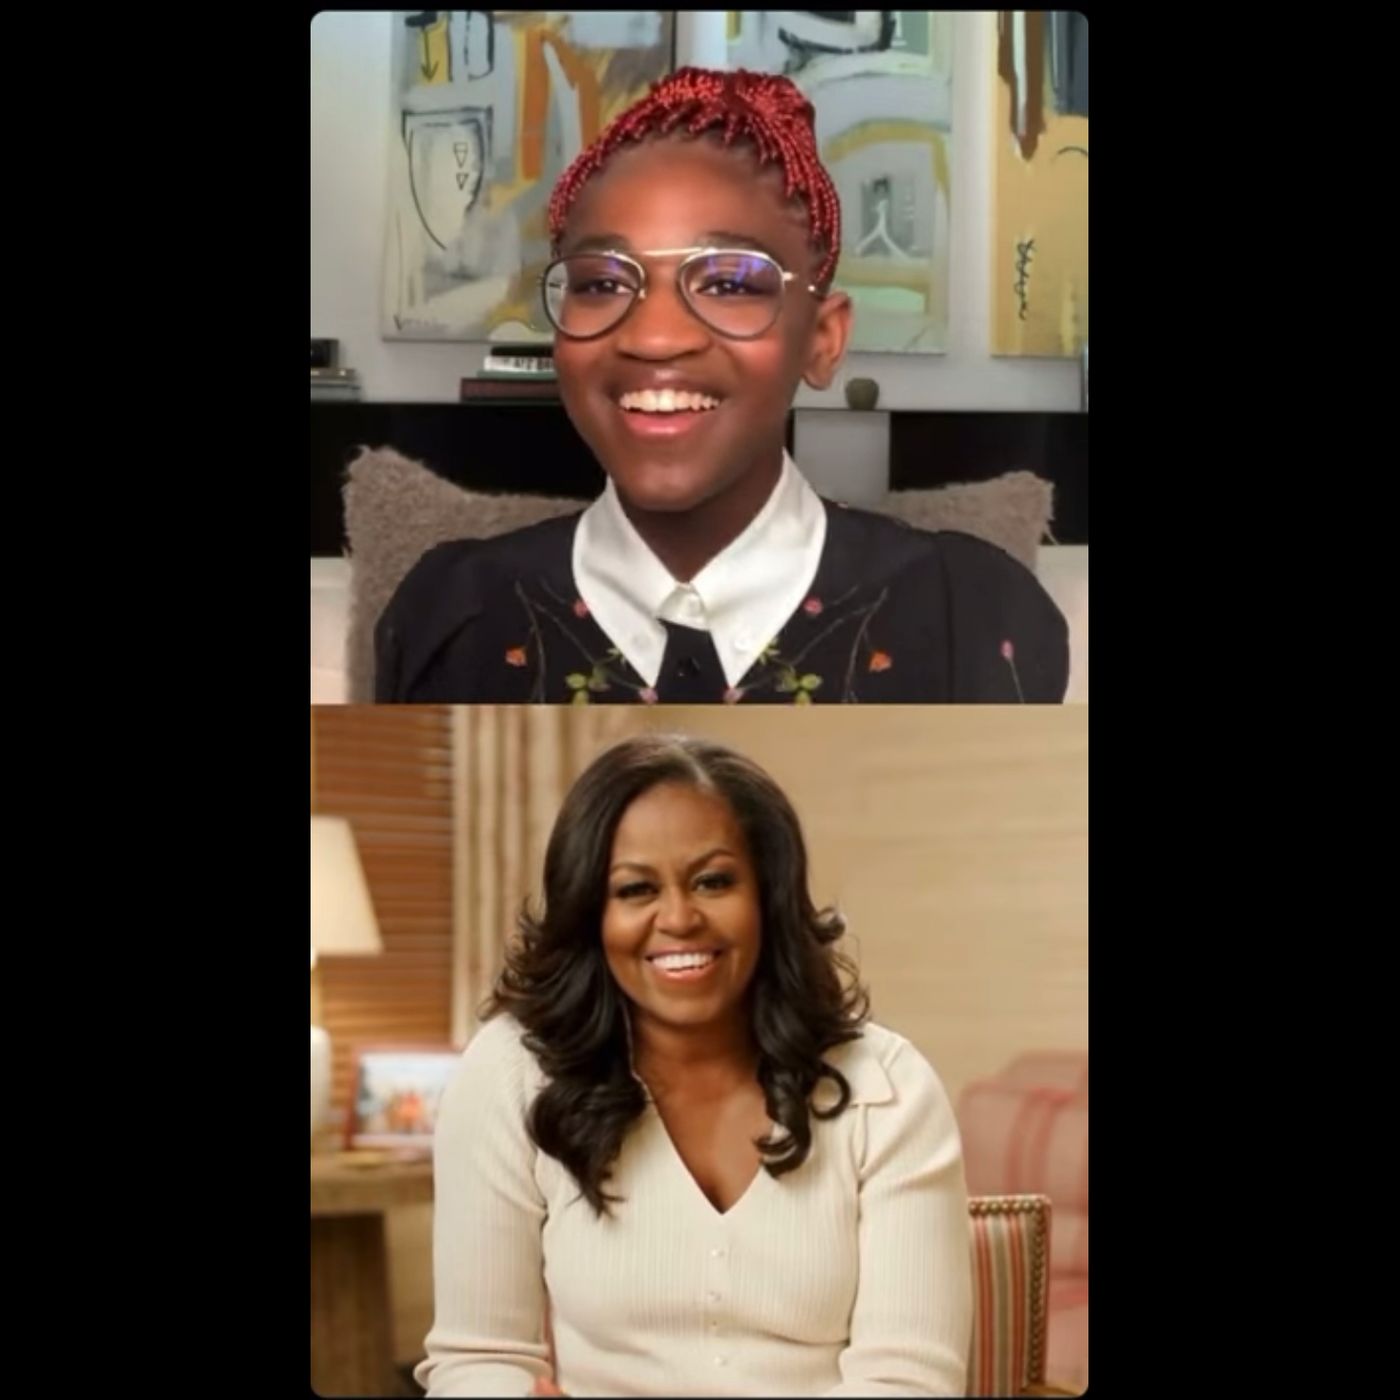 LIVING YOUR TRUTH VS GOD'S TRUTH: MICHELLE OBAMA ENCOURAGES ZAYA WADE TO BE AN EXAMPLE FOR OTHER YOUNG PEOPLE!